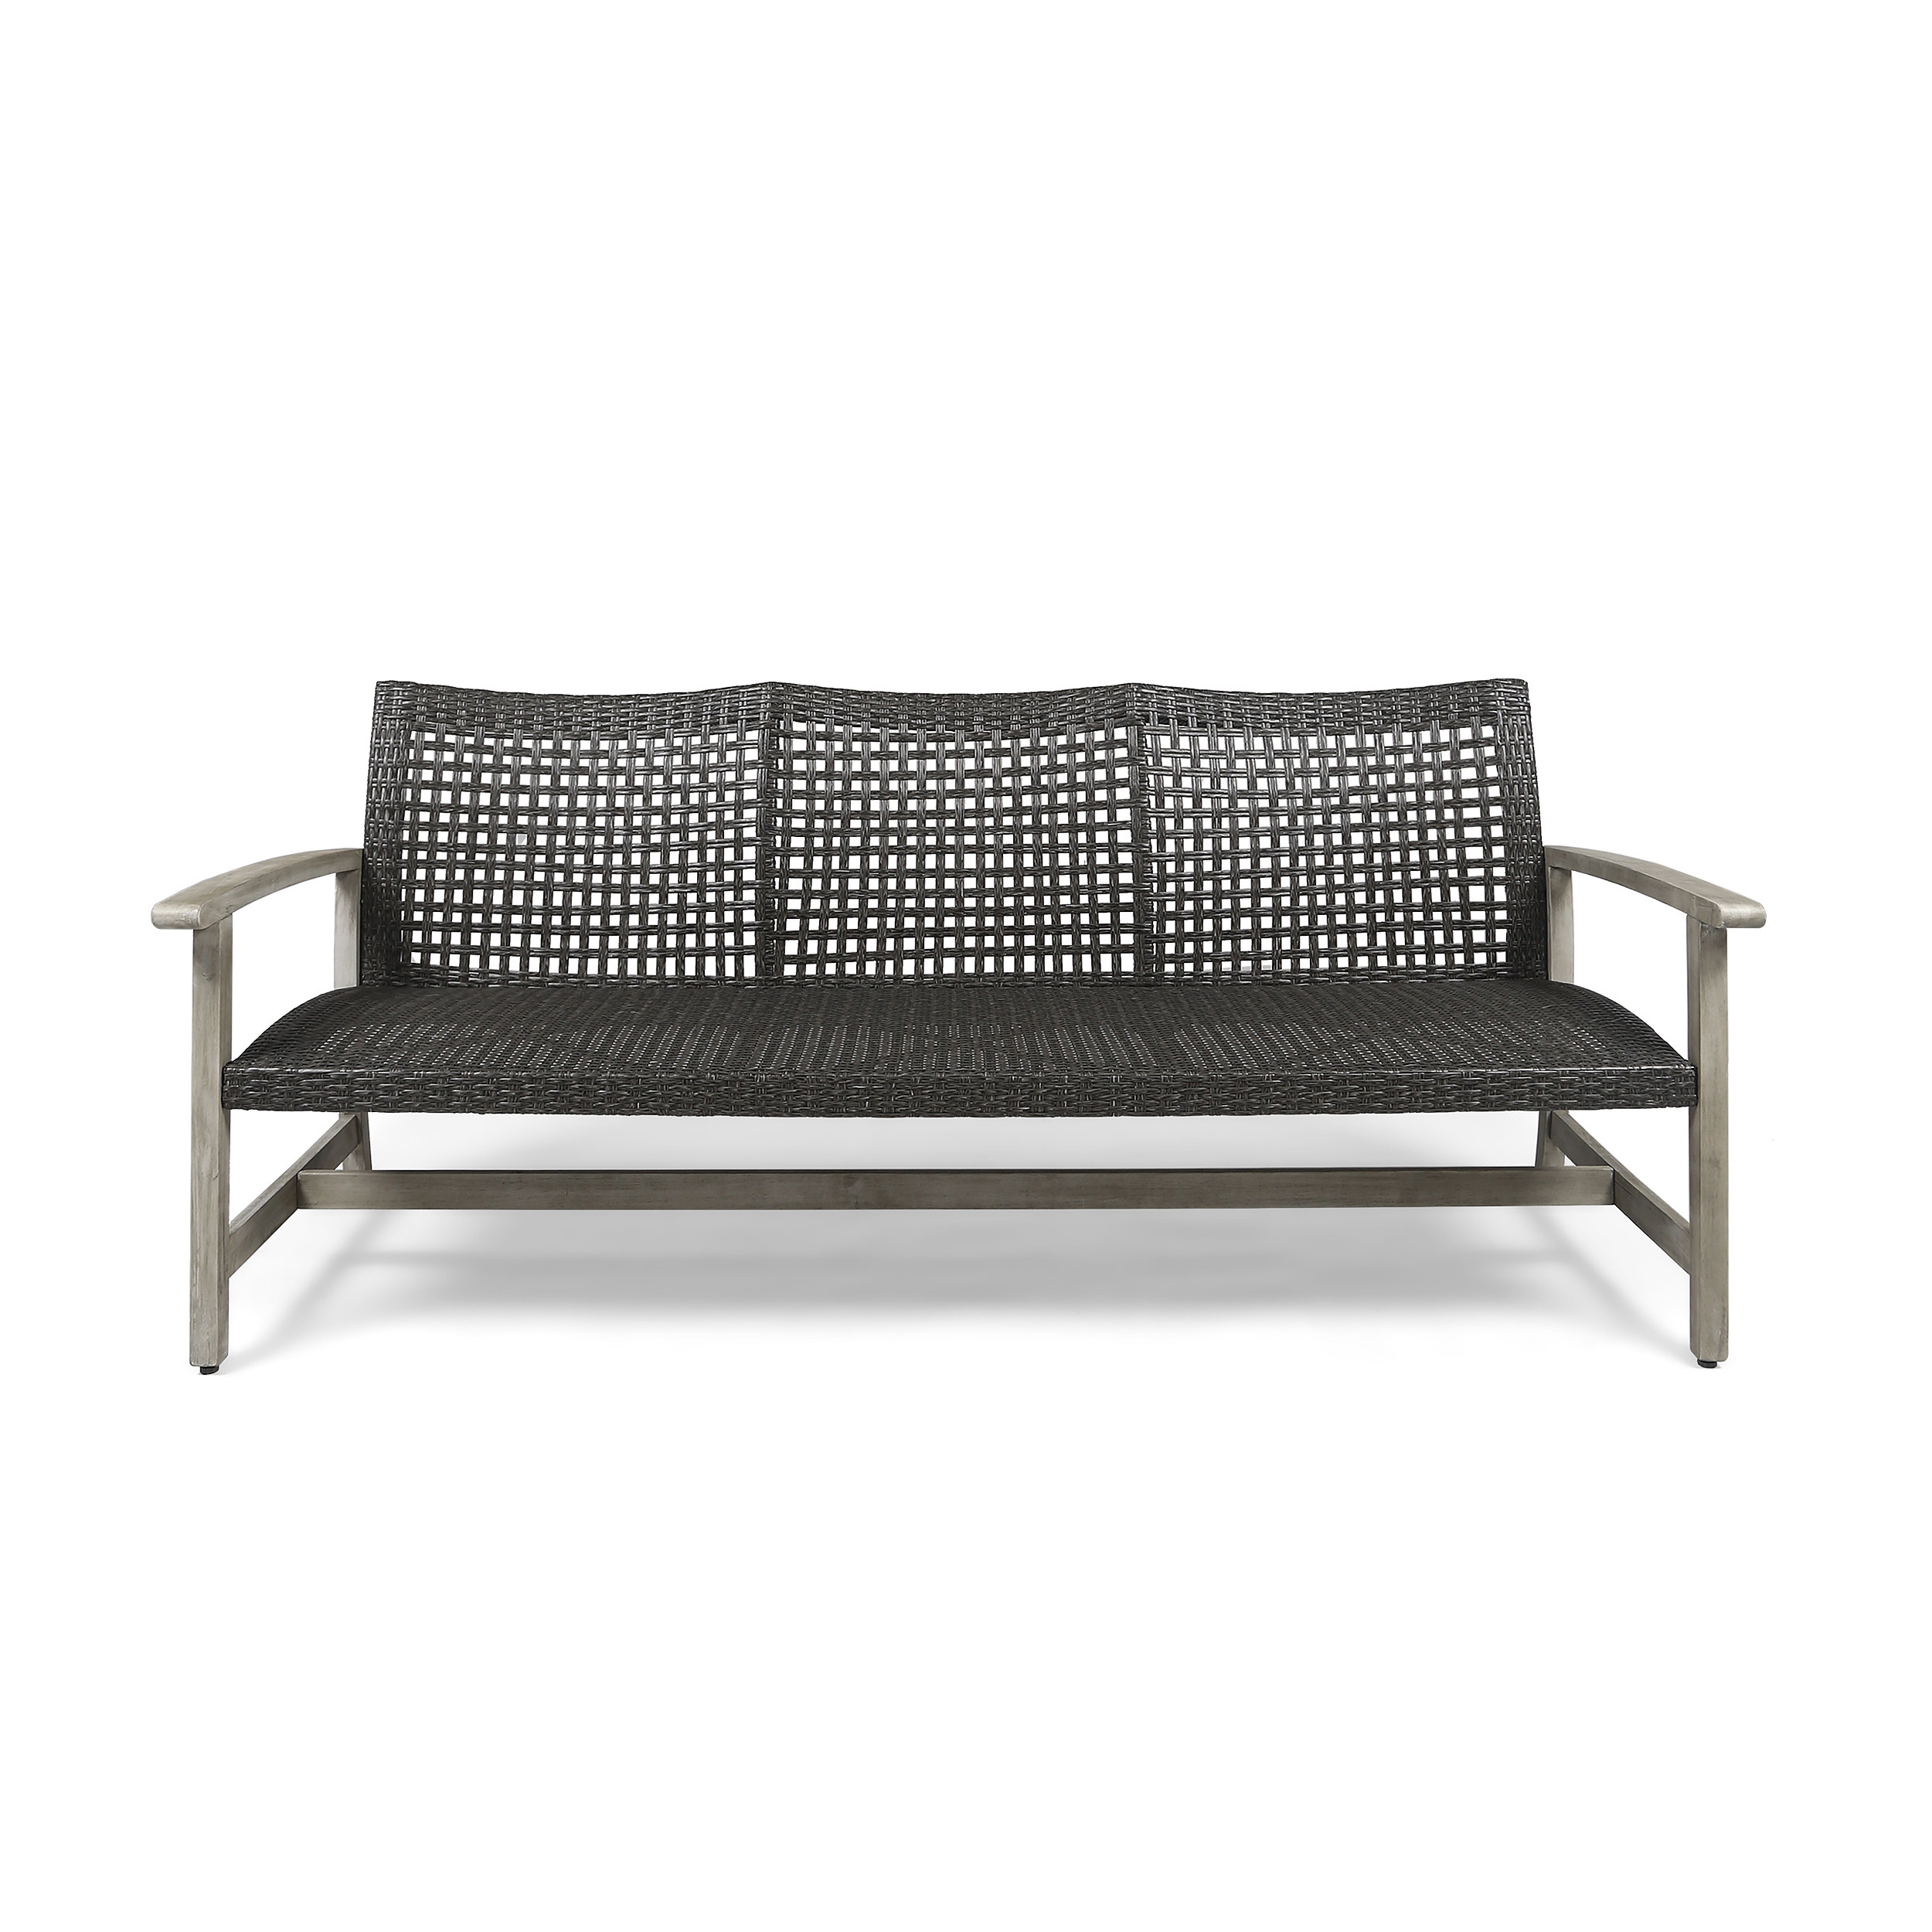 Marcia Outdoor Wood and Wicker Sofa, Light Gray Finish with Mix Black Wicker - image 1 of 6